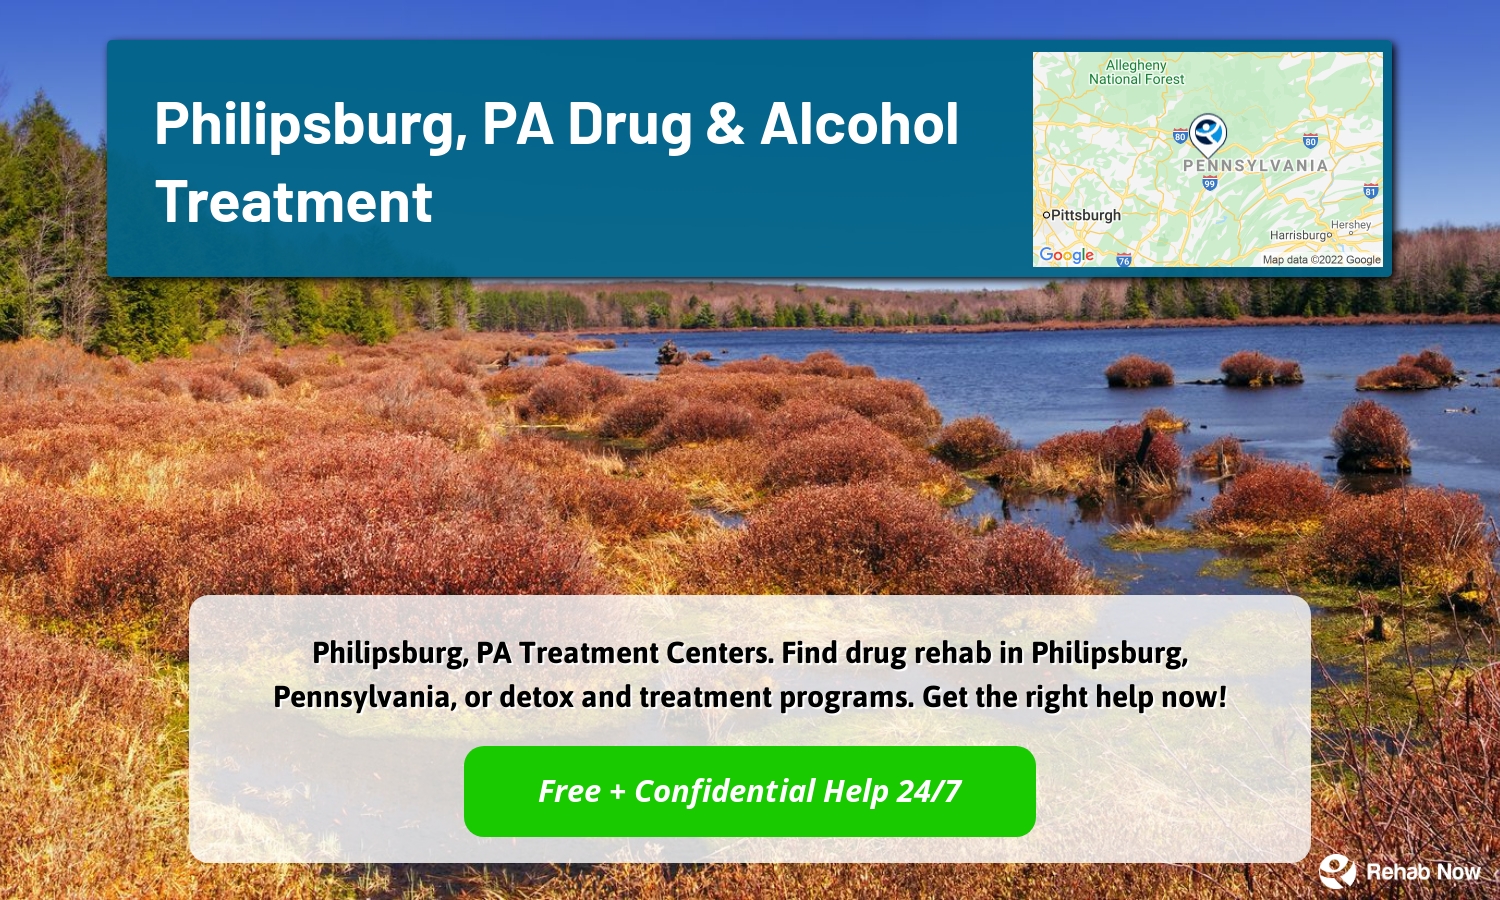 Philipsburg, PA Treatment Centers. Find drug rehab in Philipsburg, Pennsylvania, or detox and treatment programs. Get the right help now!